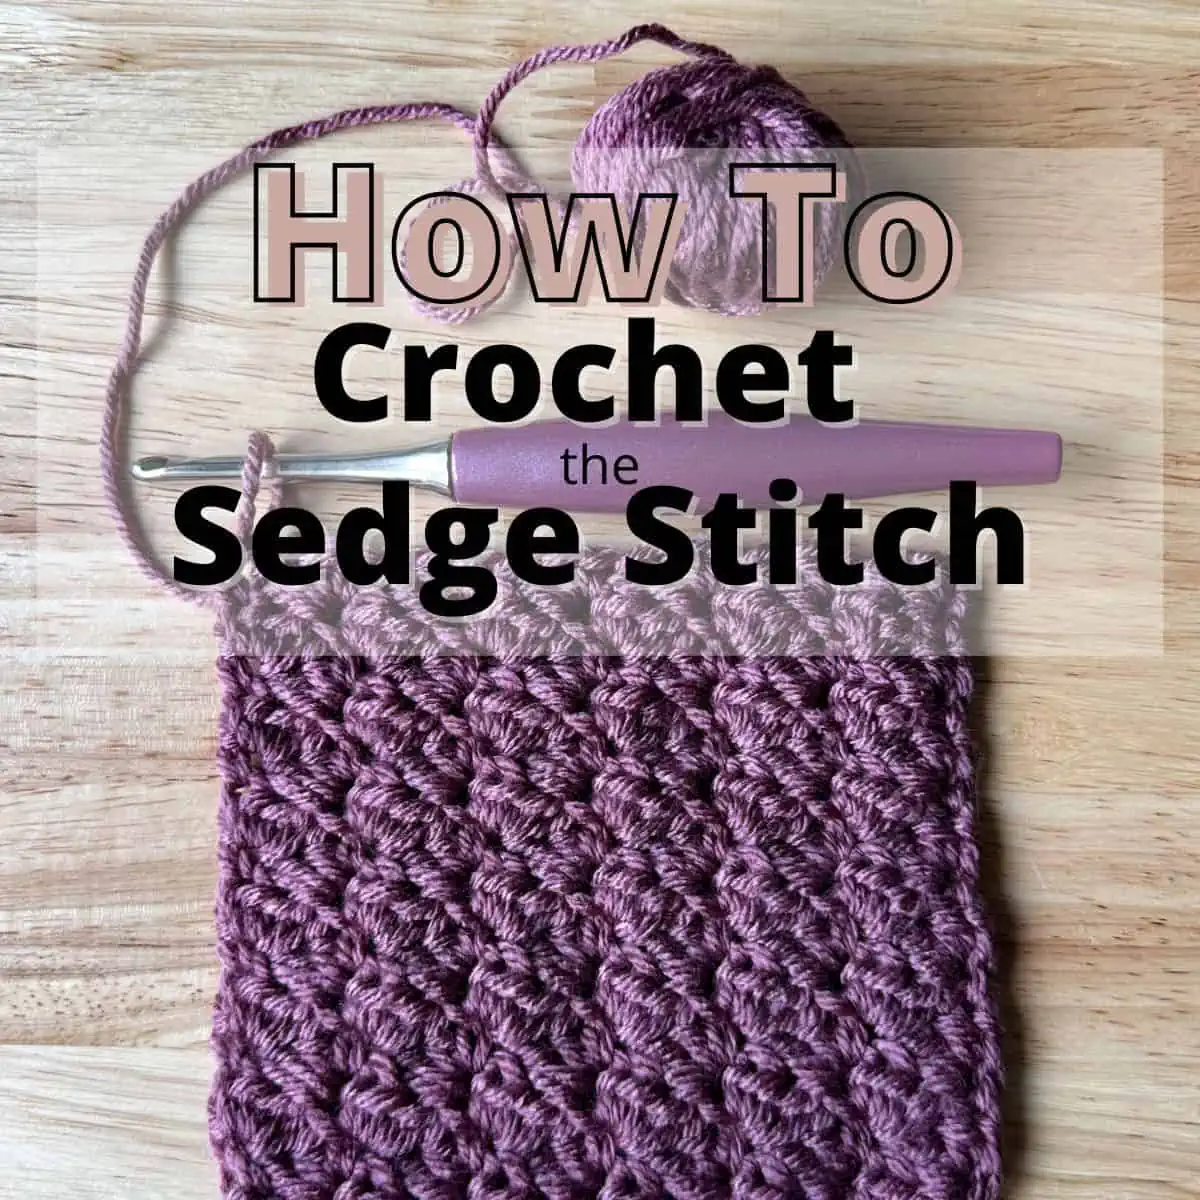 crochet swatch, hook and yarn ball with text overlay reading "how to crochet the sedge stitch"